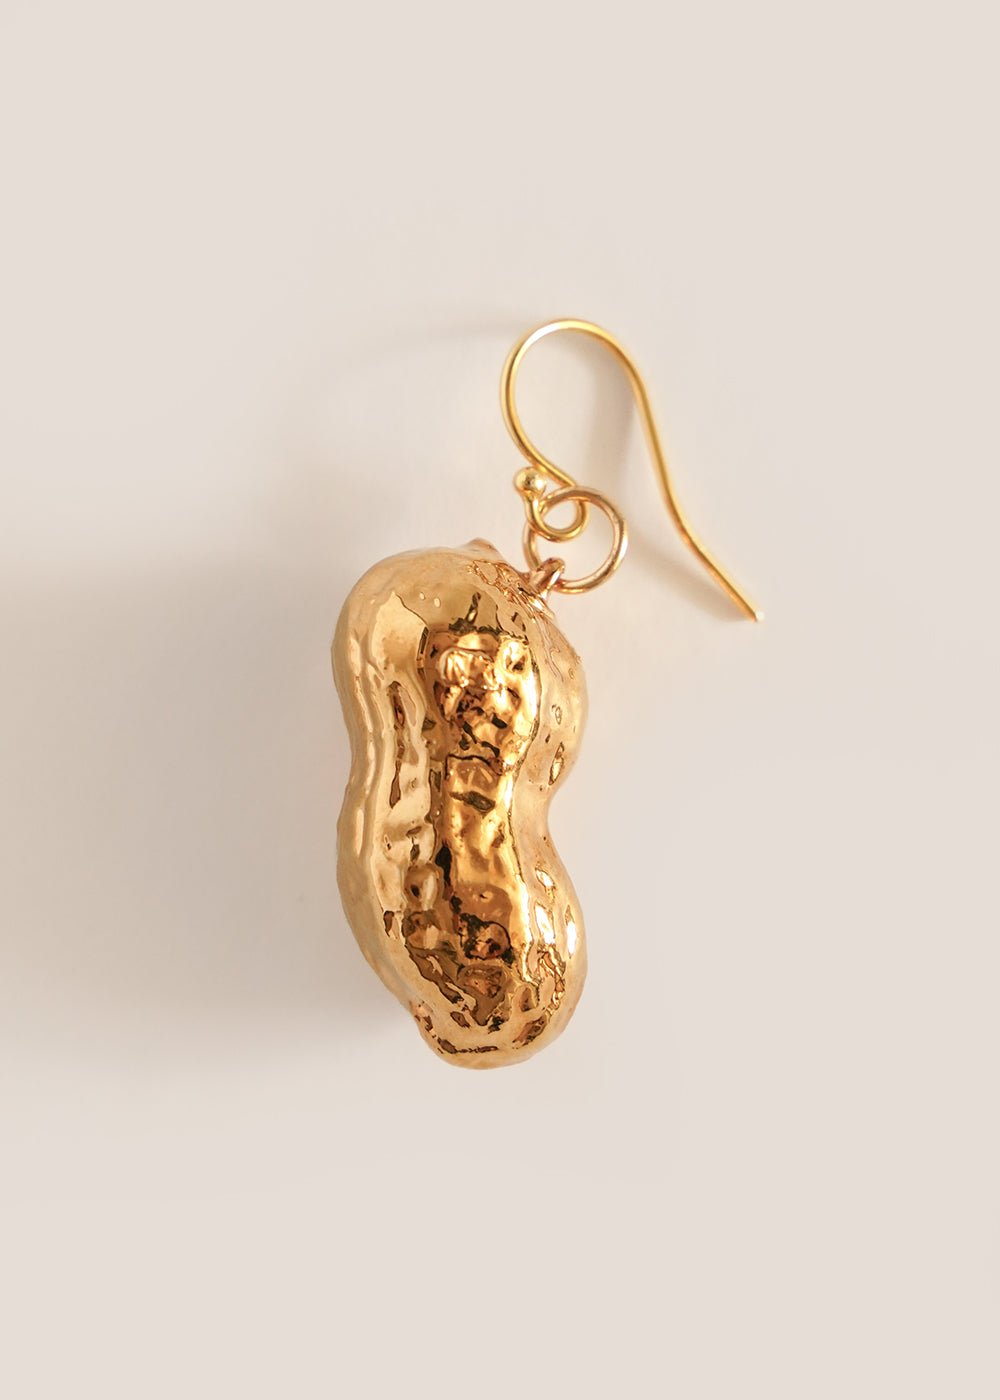 Dauphinette Peanut Earring - New Classics Studios Sustainable Ethical Fashion Canada